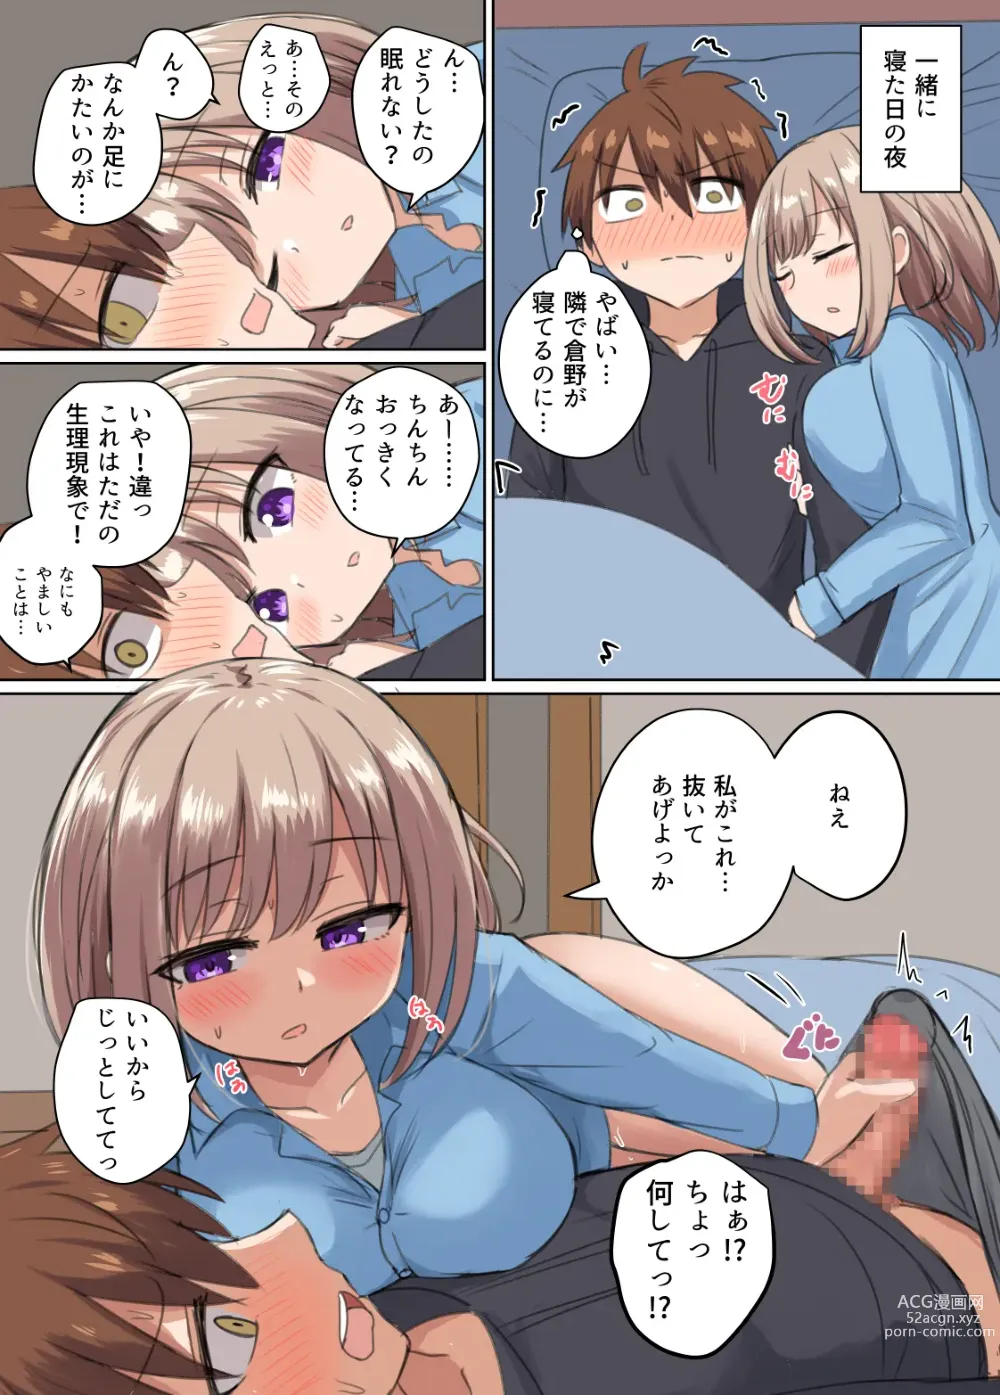 Page 6 of doujinshi Kyorikan Chikasugite Kuttsuichatta - side by side with you